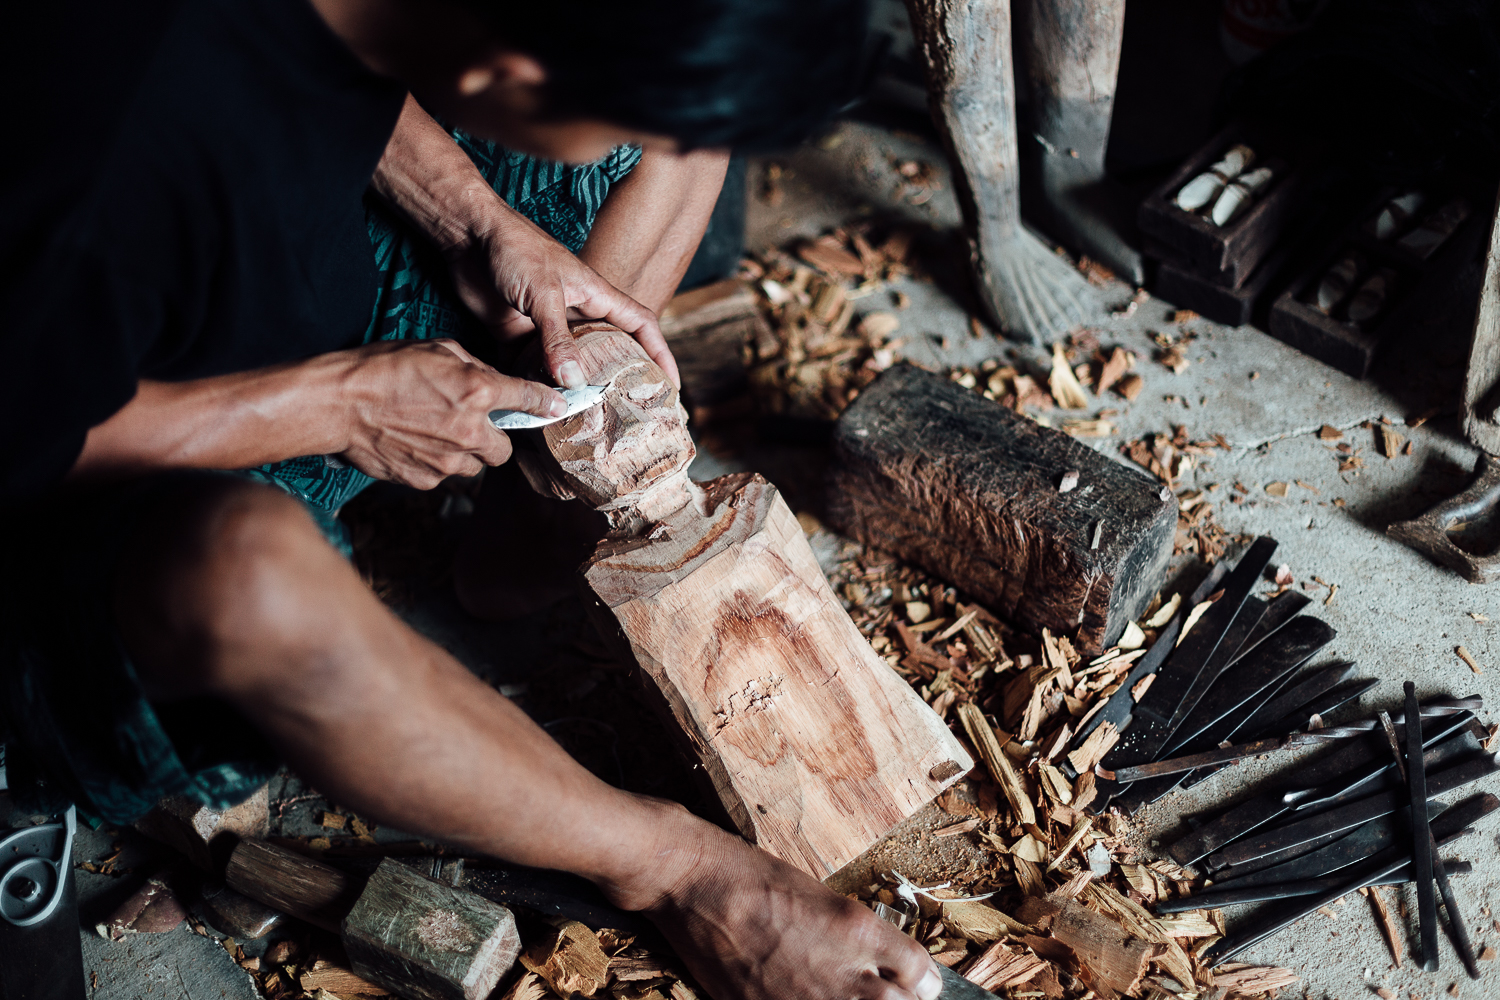 A man carves a 'tau-tau' representing the dead. After the ceremony, the body is carried in a coffin and buried in a cave dug in cliffs next to his ancestors. This sacred effigy is placed on a balcony built against the cliff and is believed to protect the living.